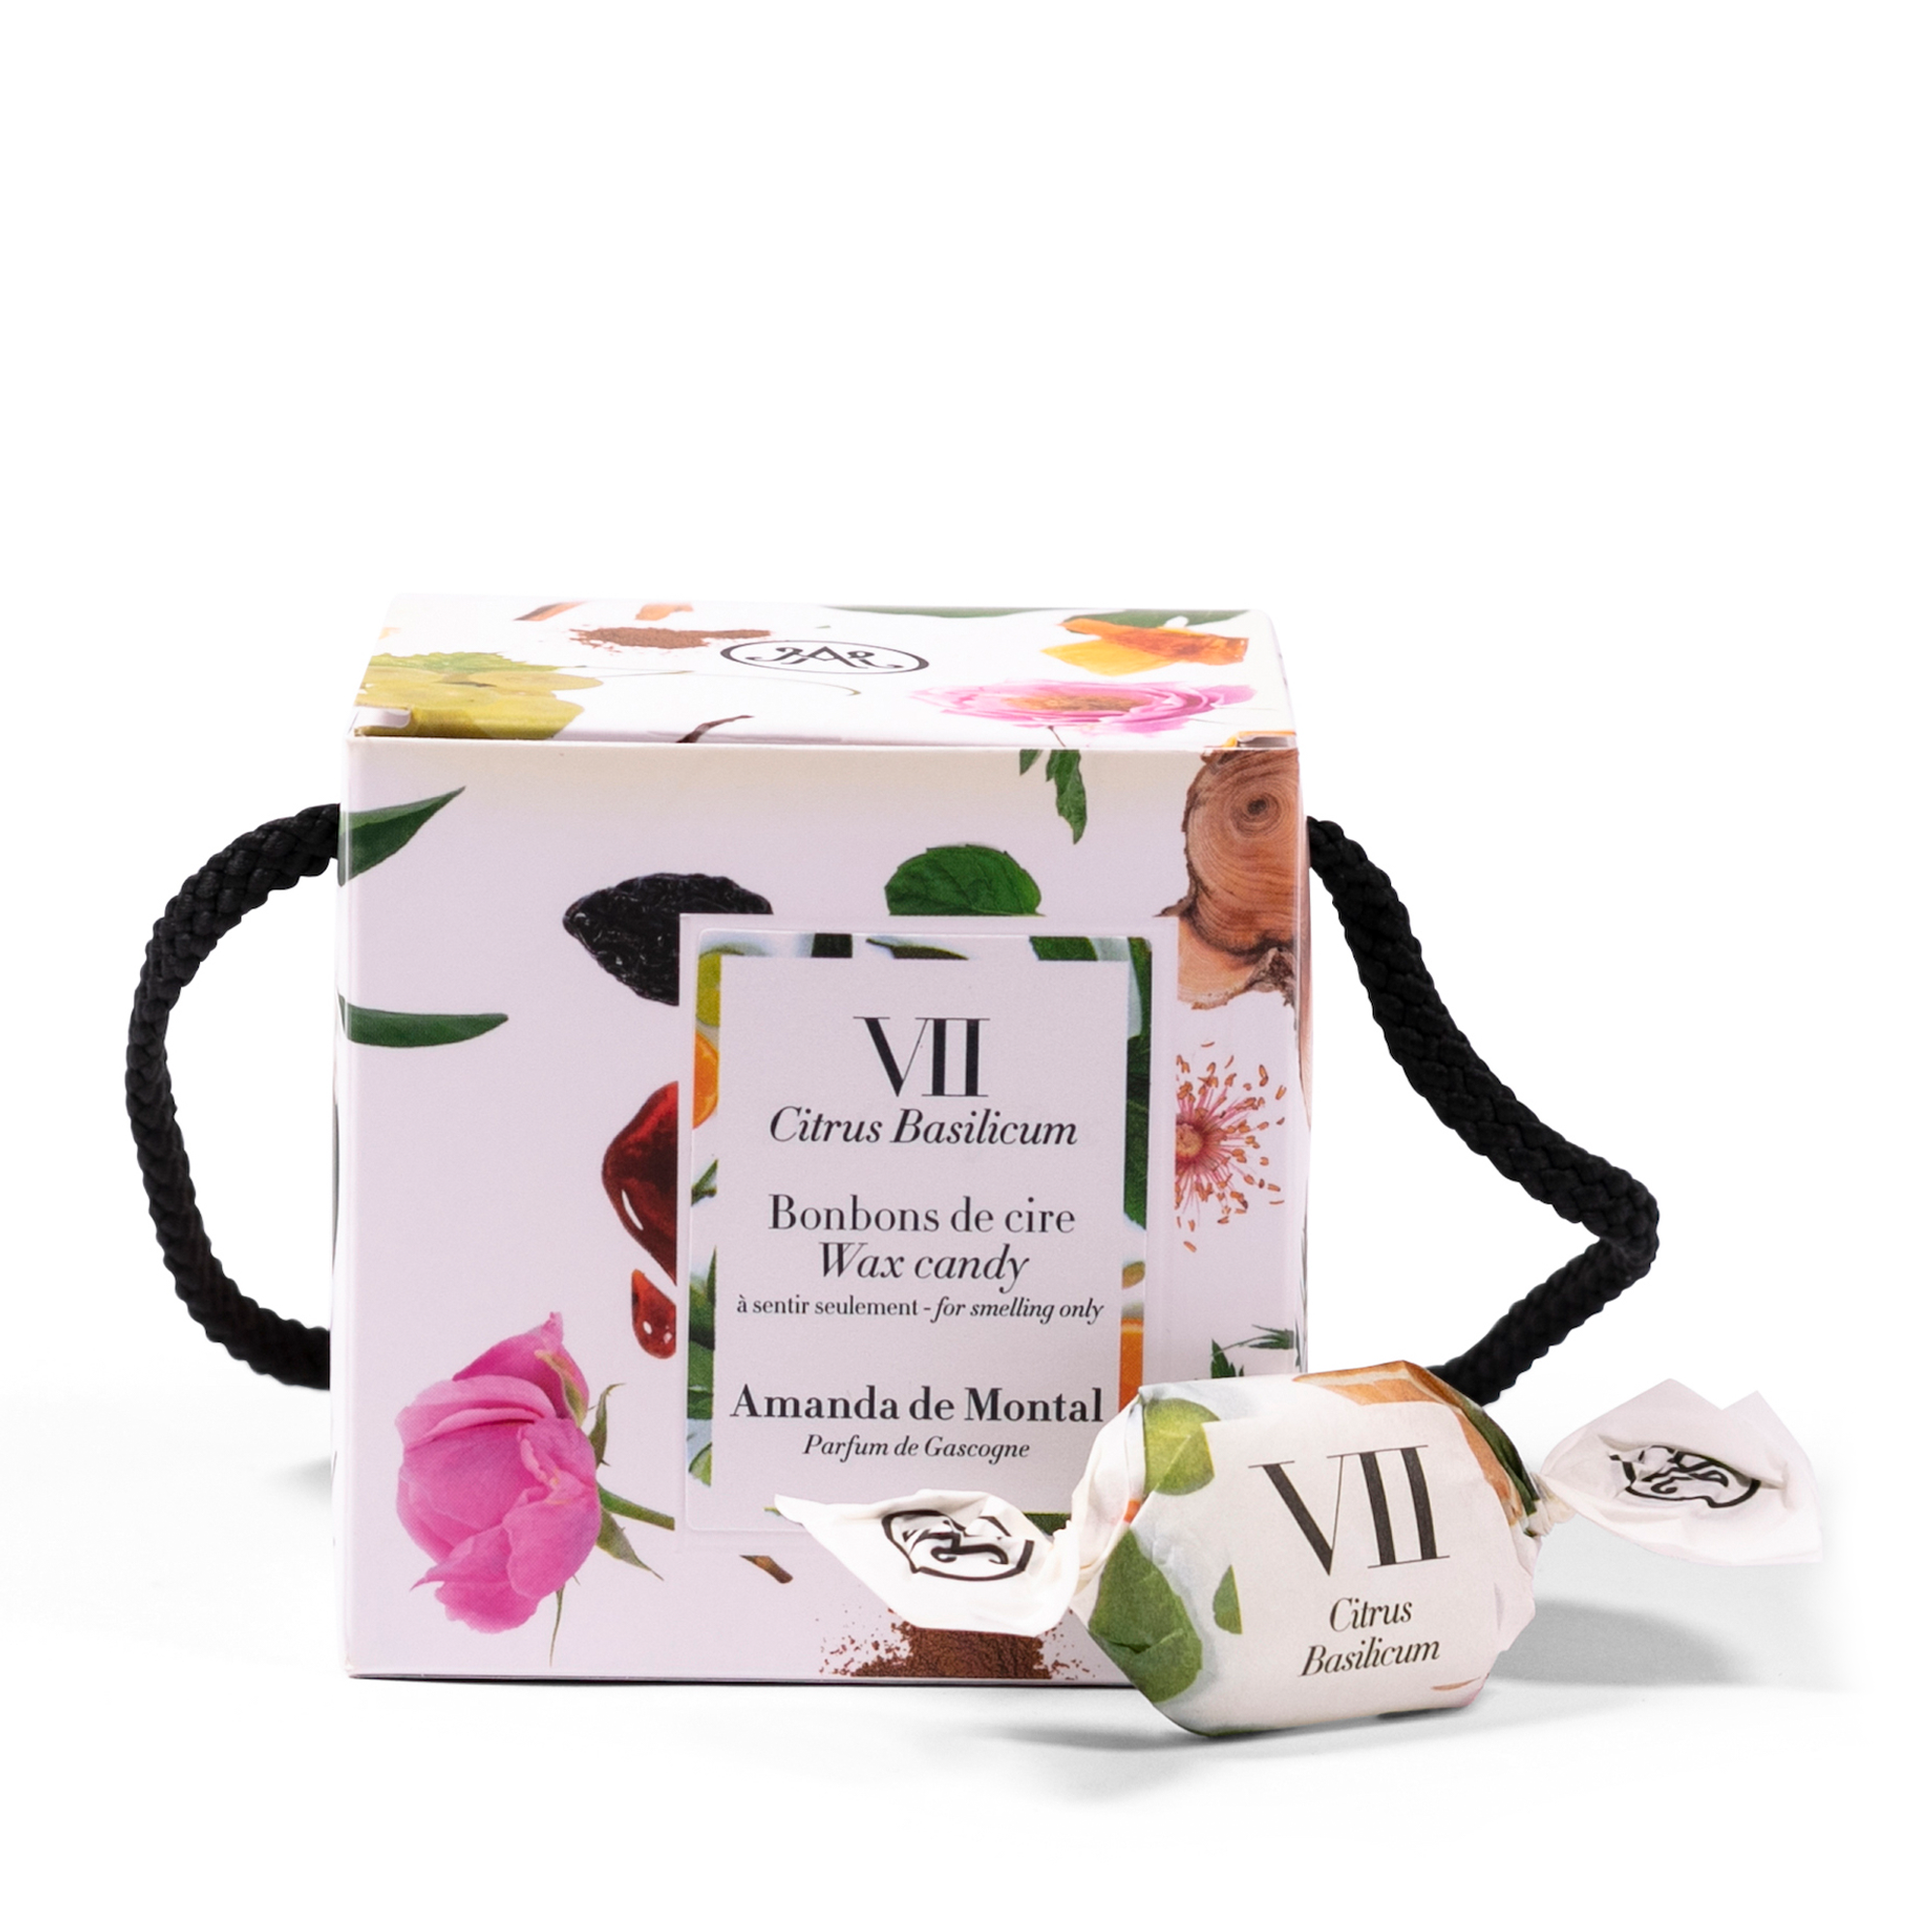 Wrapped in a white box, each scented wax candy features a precise blend of natural, plant-based waxes that capture the fragrance of lemon zest, tangerine, fresh mint, basil, and a hint of coriander.